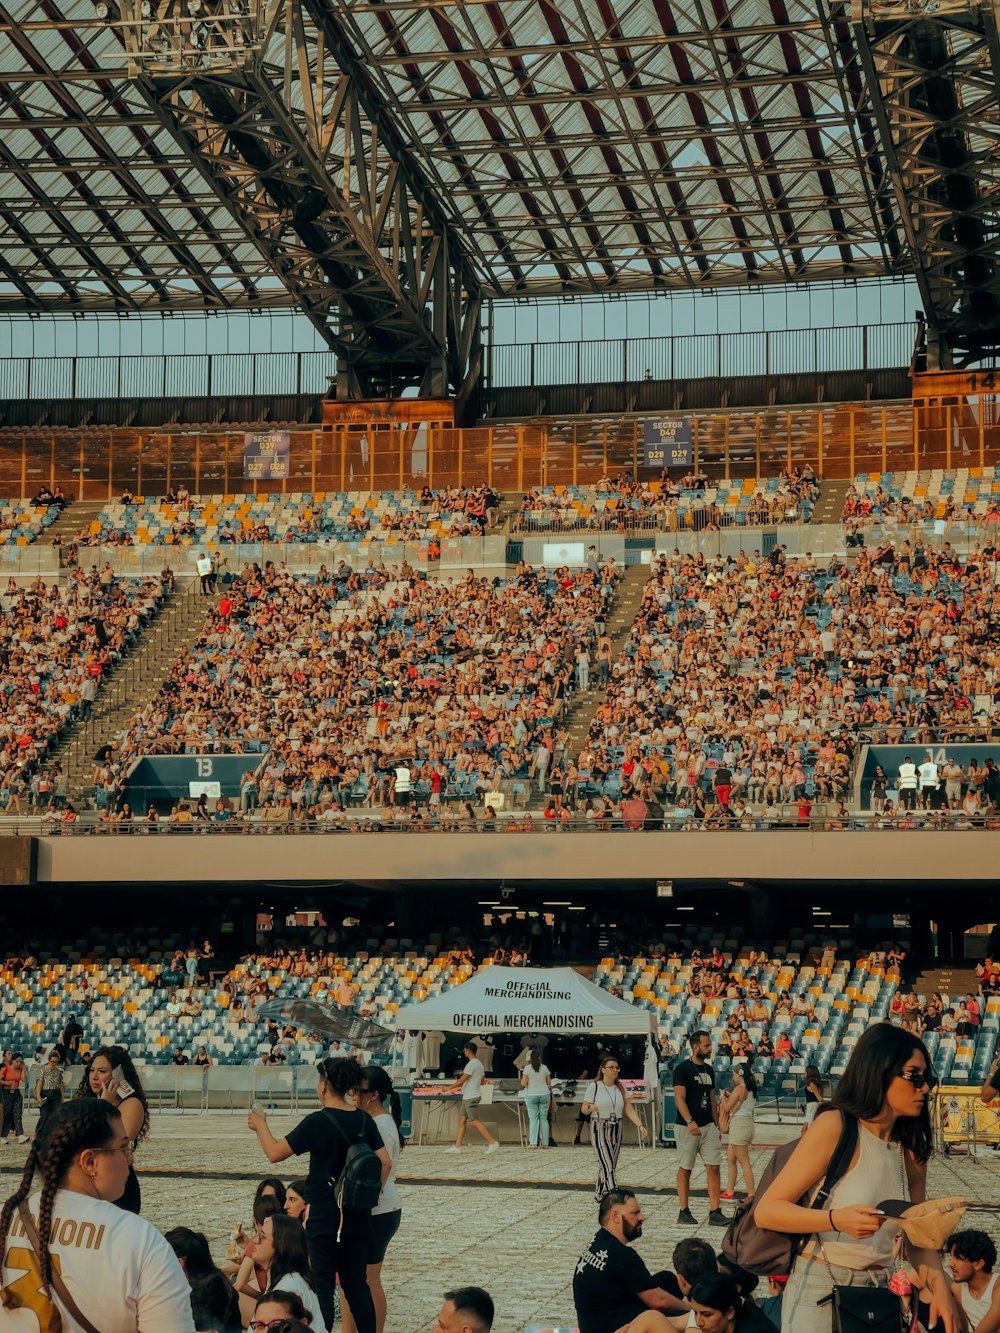 a large crowd of people sitting in a stadium